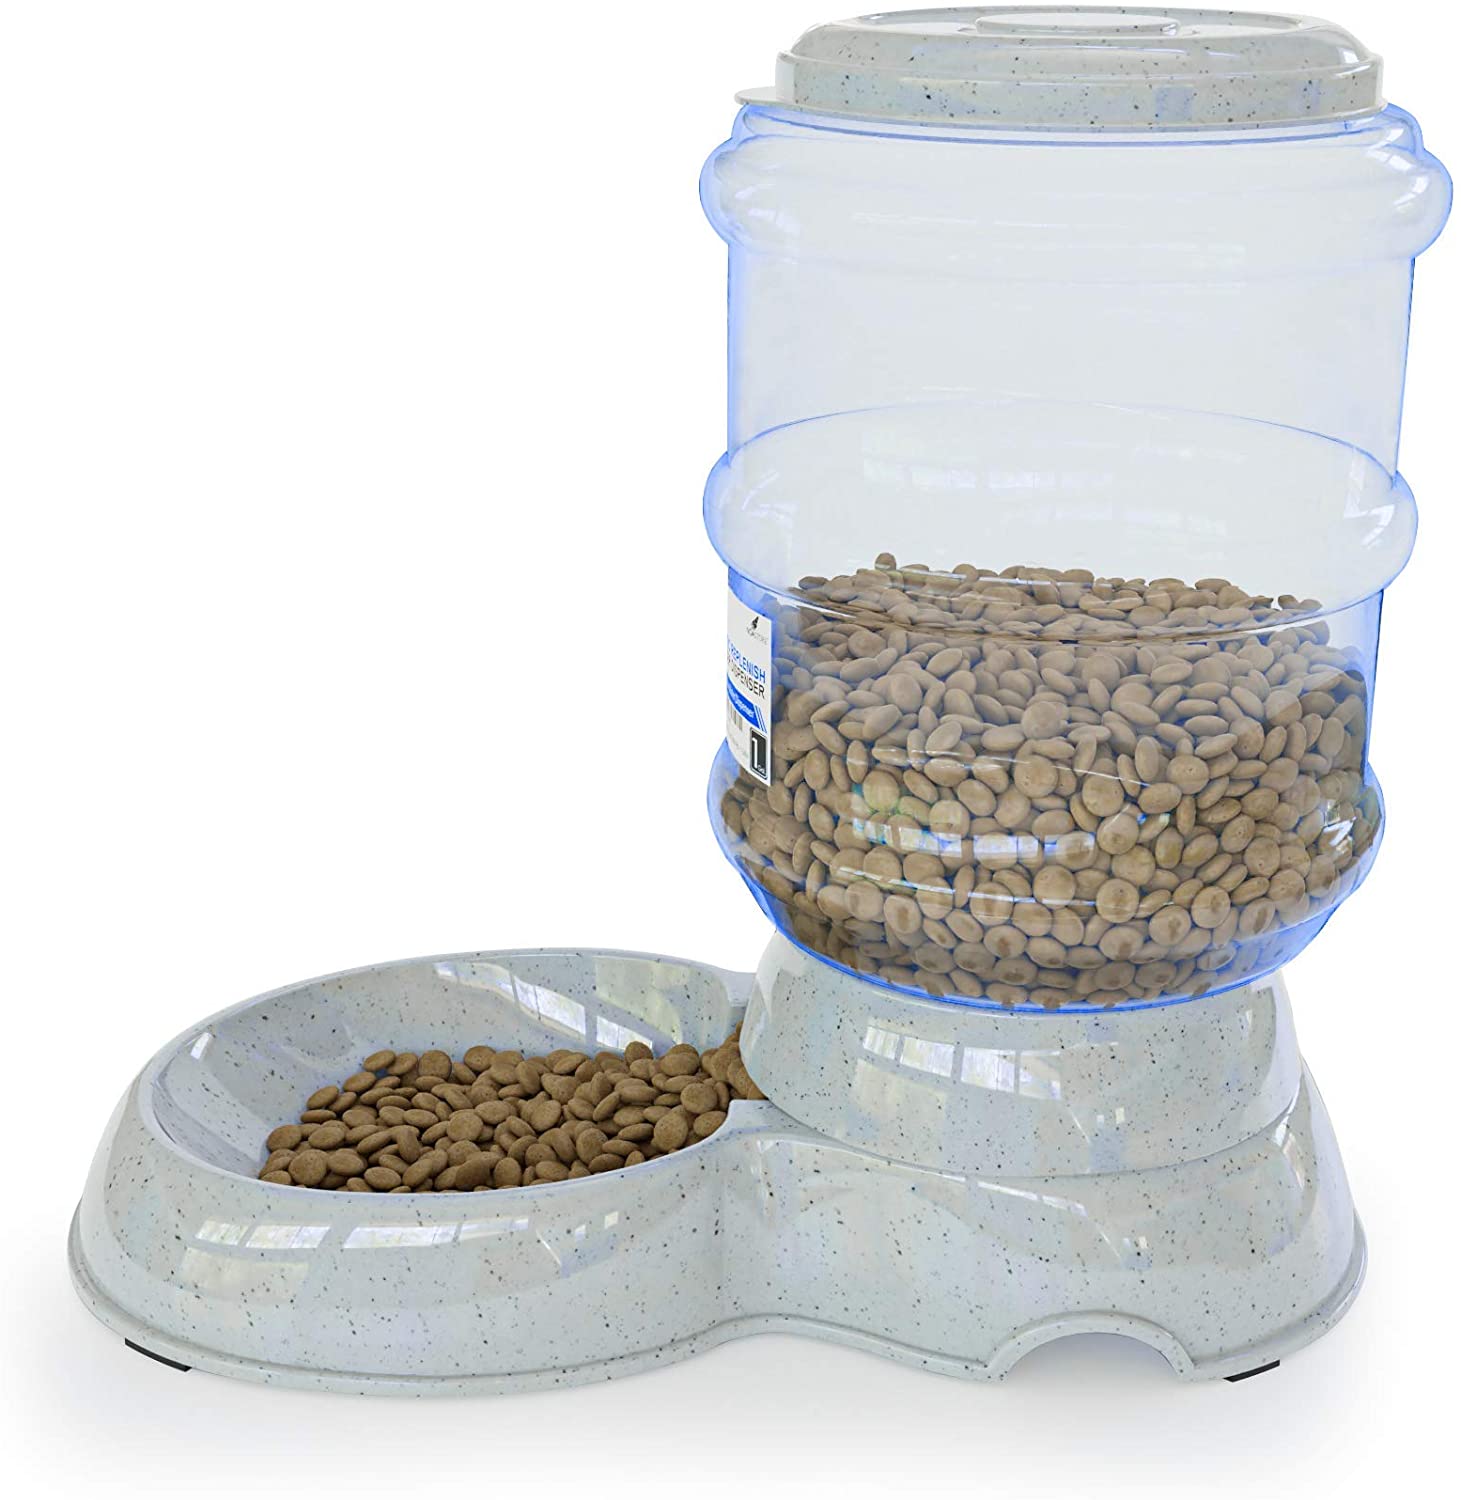 Noa Store Automatic Replenish Pet Feeder - Gravity Food Station for Dogs, Cats or Small Pets - 1 Gallon - e4cents